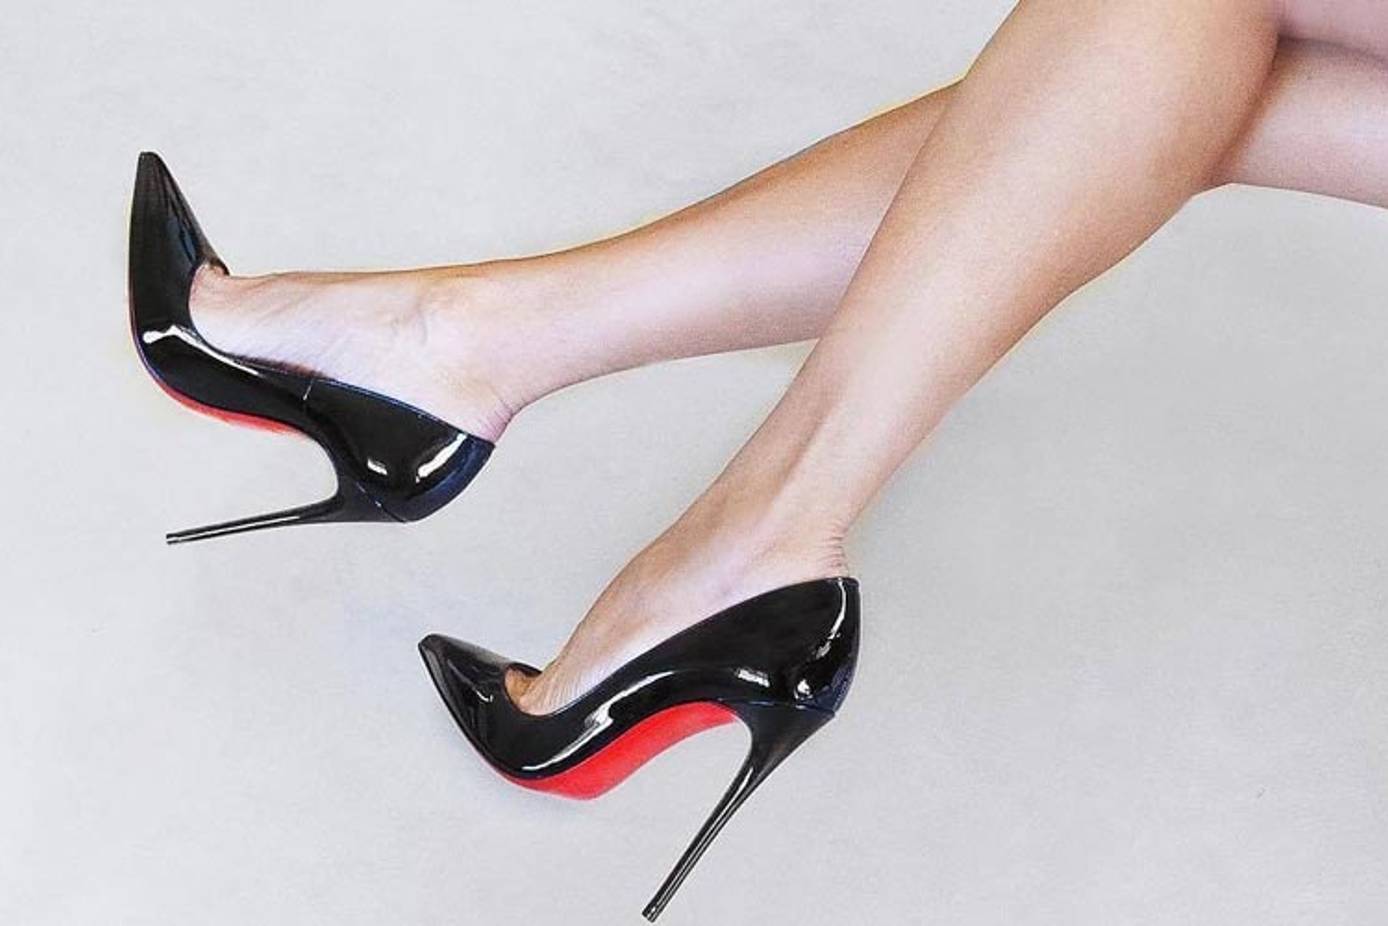 Christian Louboutin: a six-inch form of freedom